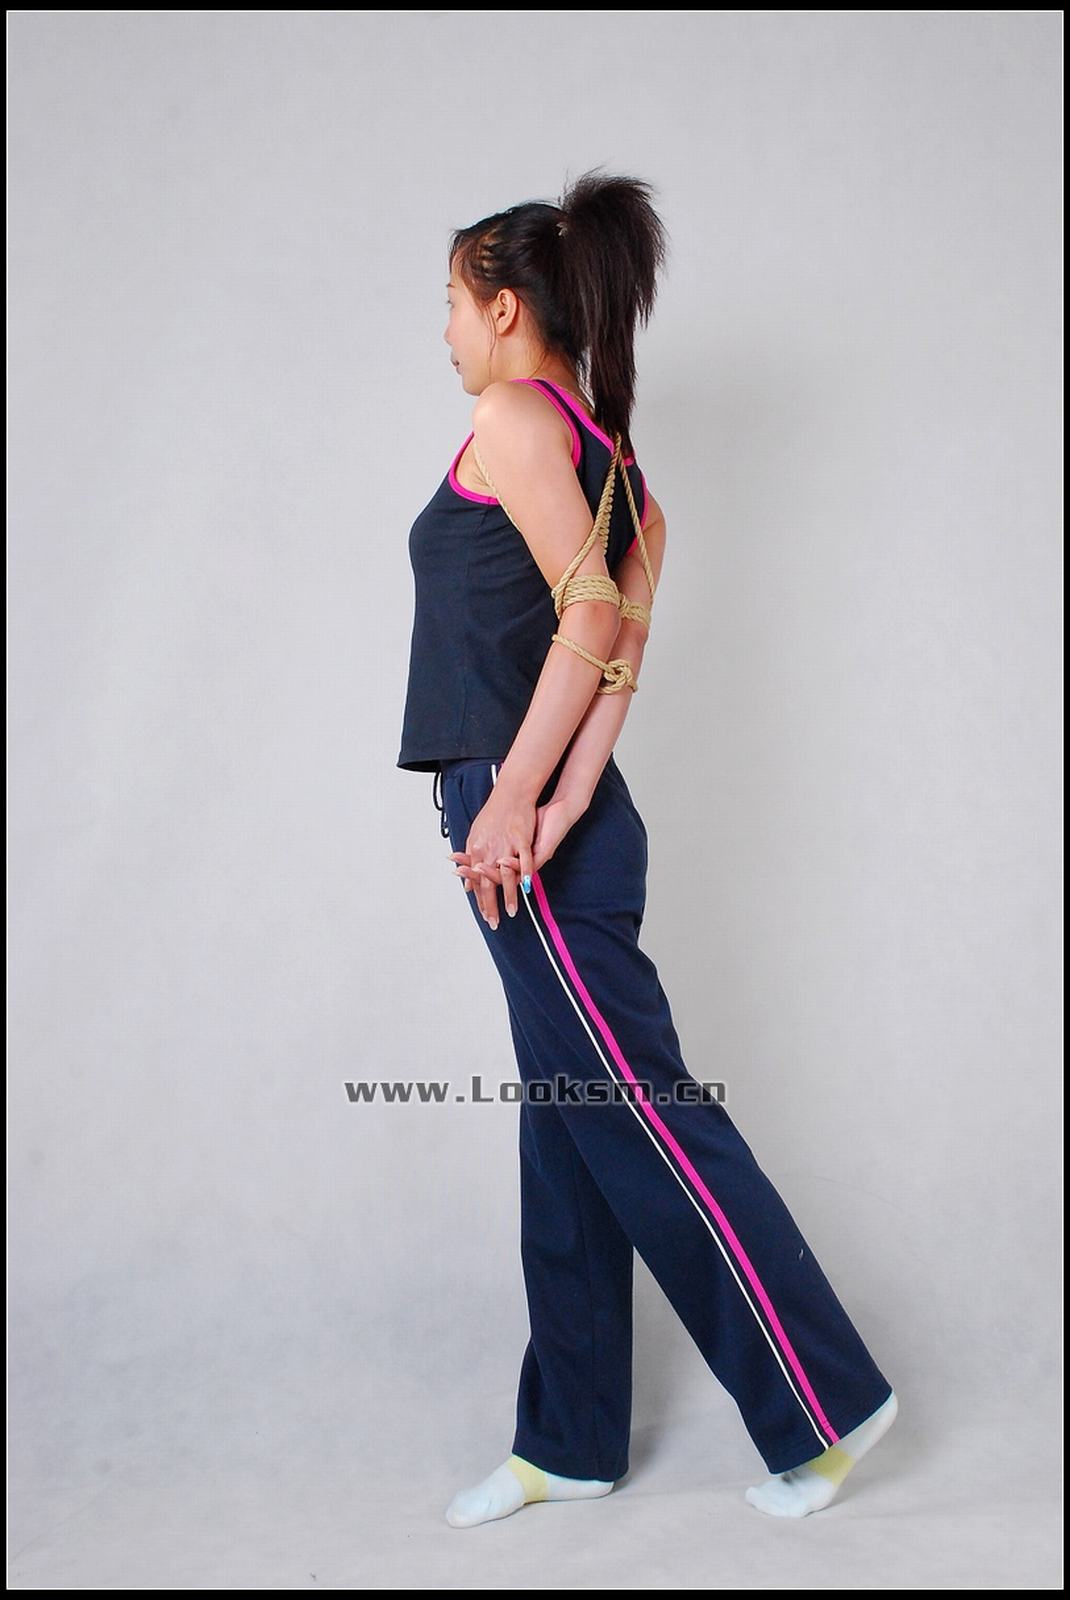 Chinese Rope Model 307